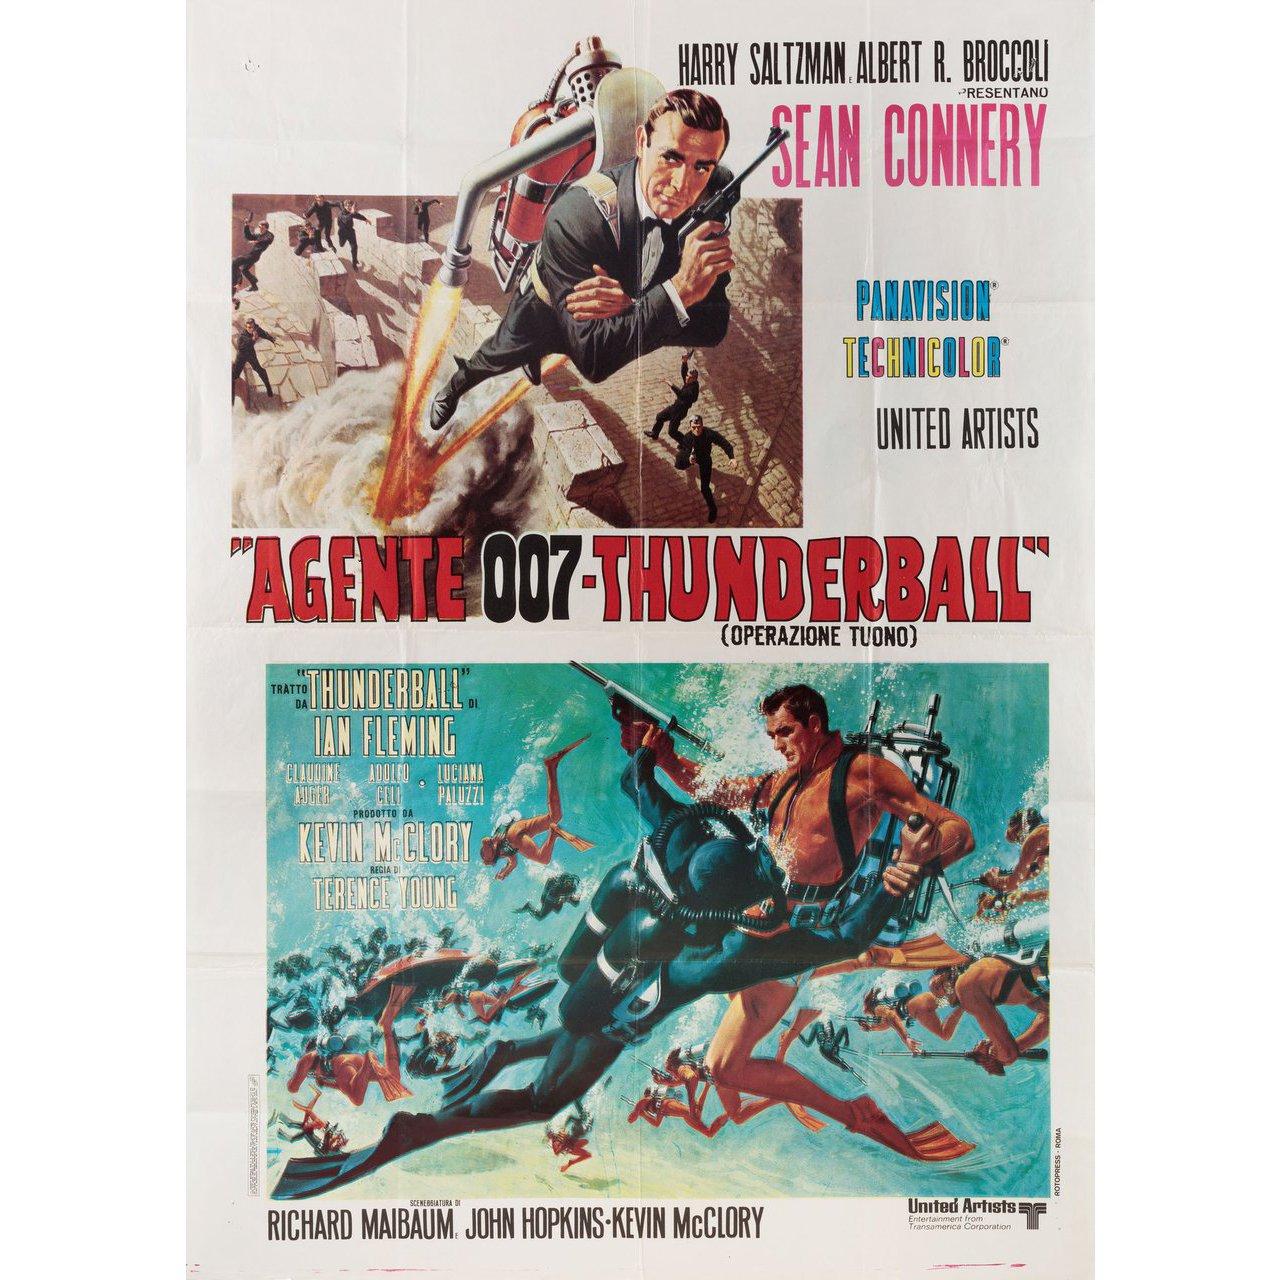 Original 1970s re-release Italian due fogli poster by Robert McGinnis / Frank McCarthy for the 1965 film Thunderball directed by Terence Young with Sean Connery / Claudine Auger / Adolfo Celi / Luciana Paluzzi. Very Good condition, folded. Many